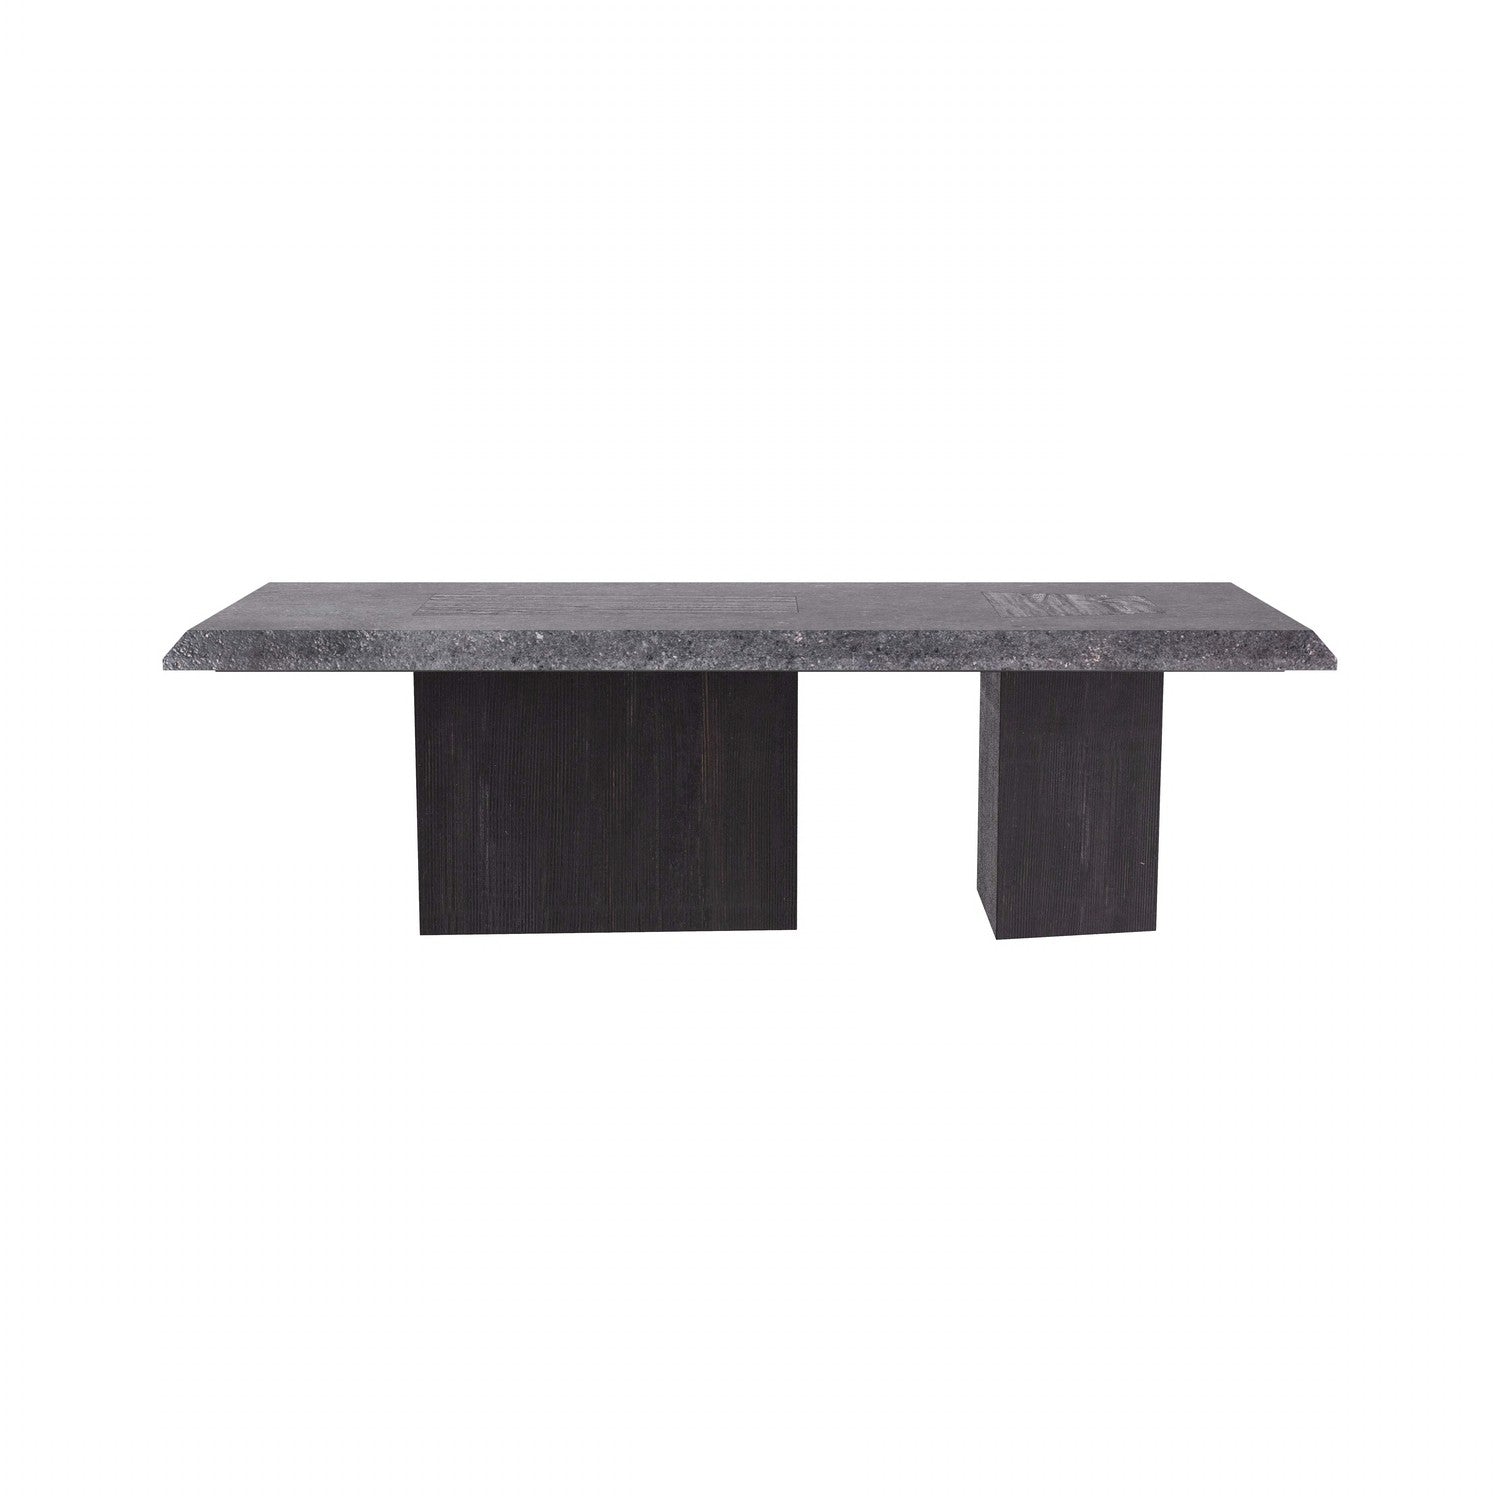 Cocktail Table from the Vance collection in Charcoal finish